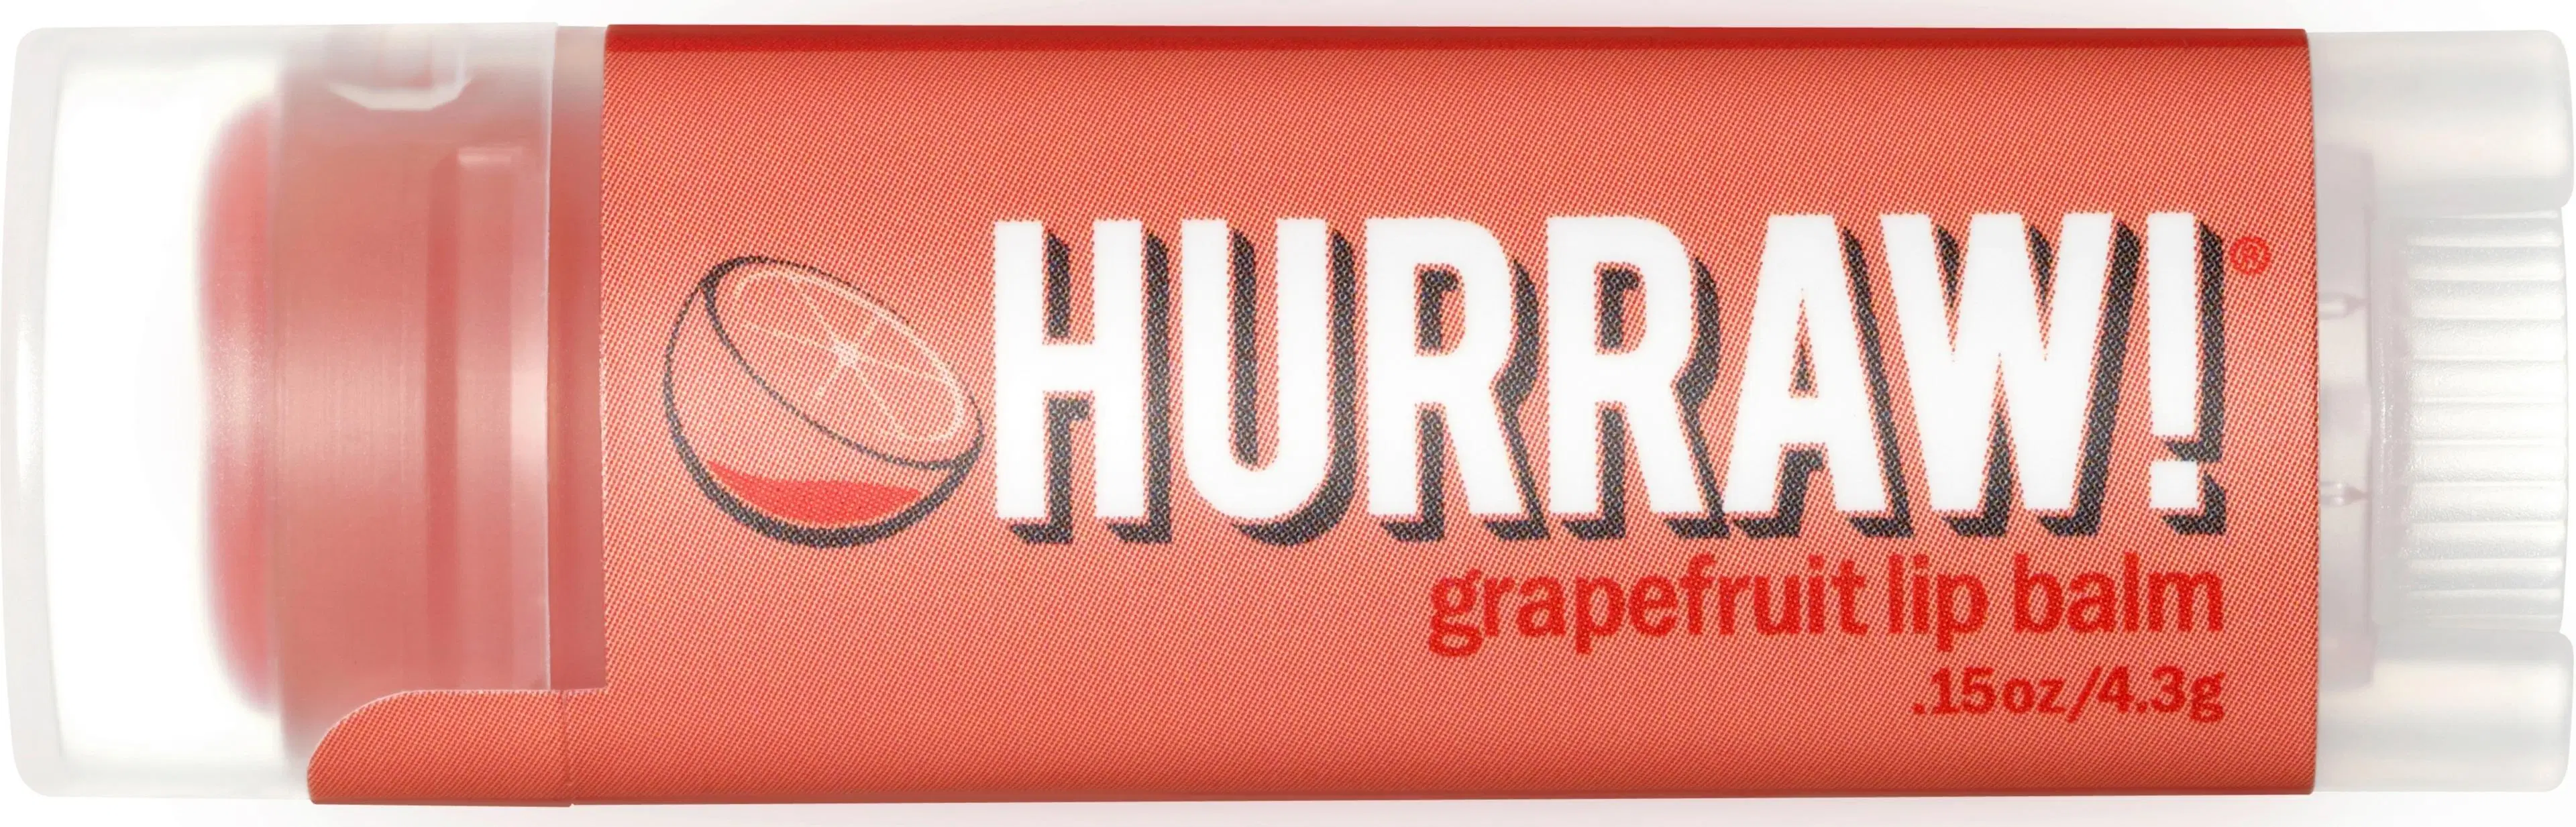 HURRAW! Greippi huulivoide 4,3 g